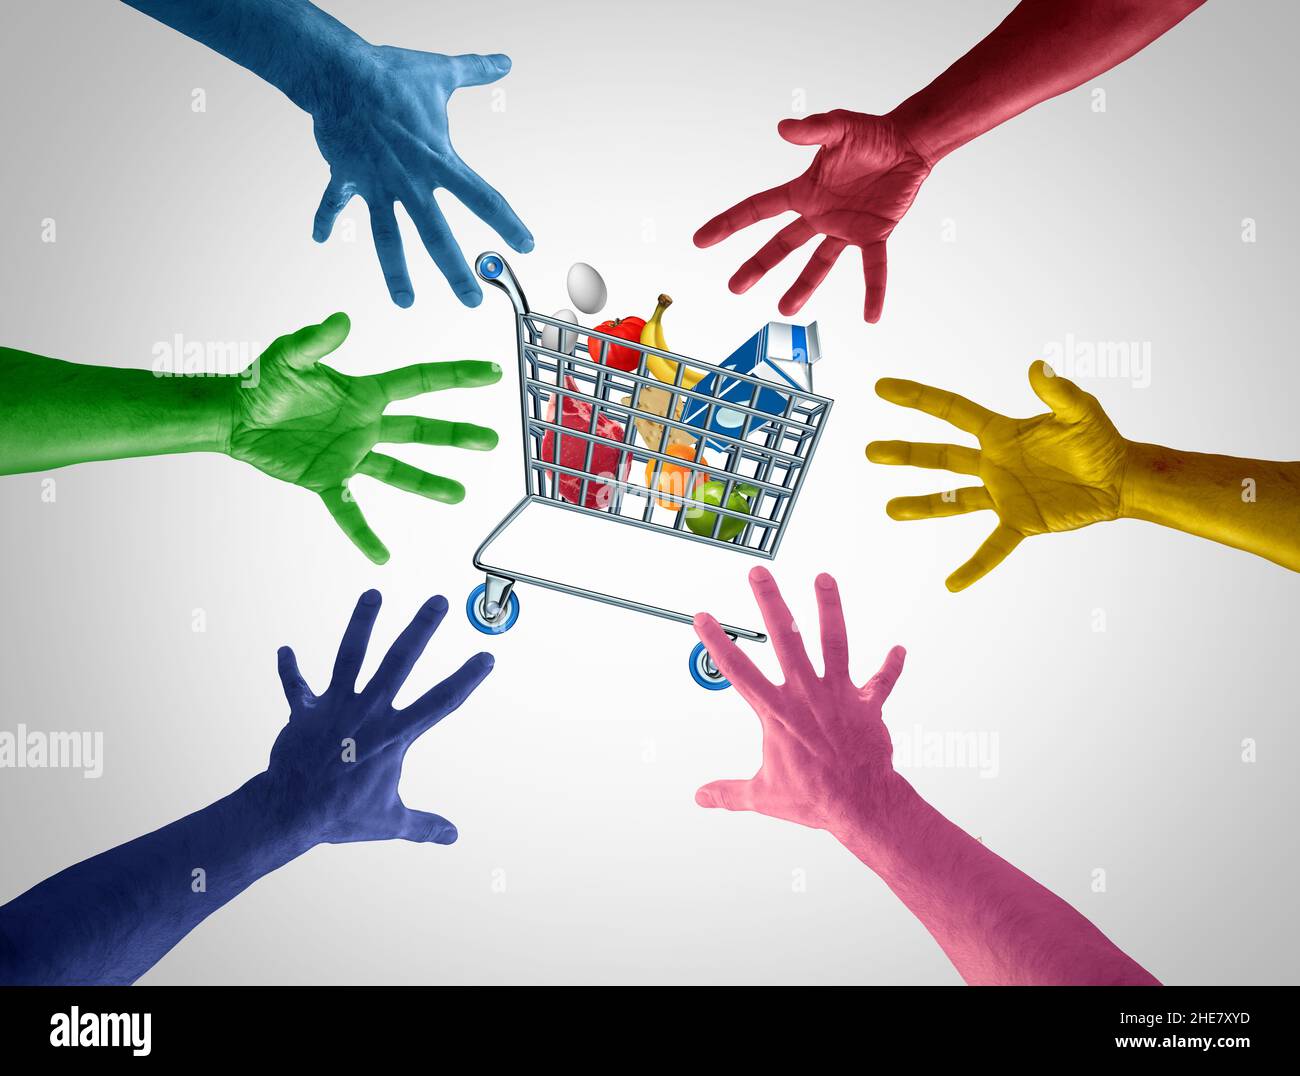 Supply shortage concept and consumer demand panic as diverse hands reaching for an almost empty supermarket shopping cart due to factory shutdown caus Stock Photo